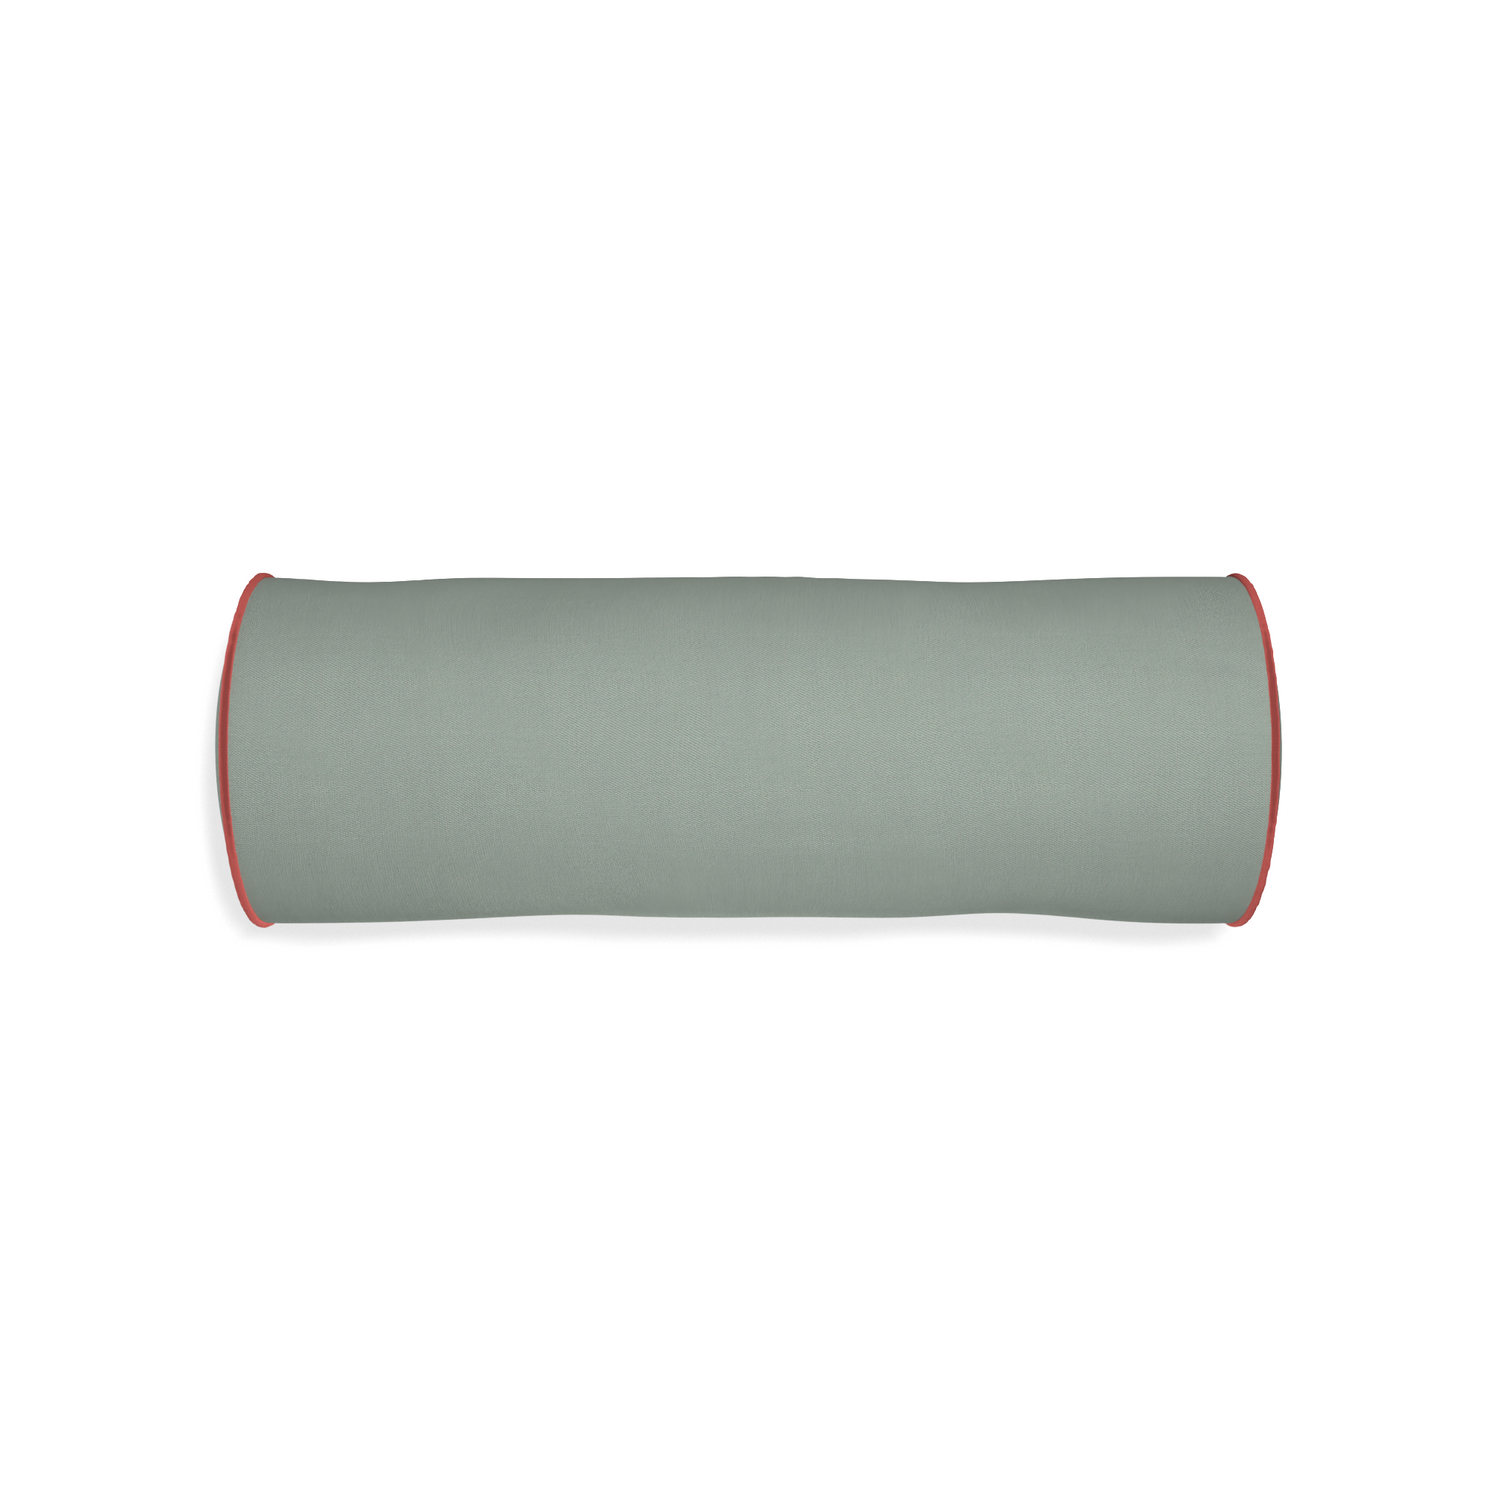 Bolster sage custom pillow with c piping on white background